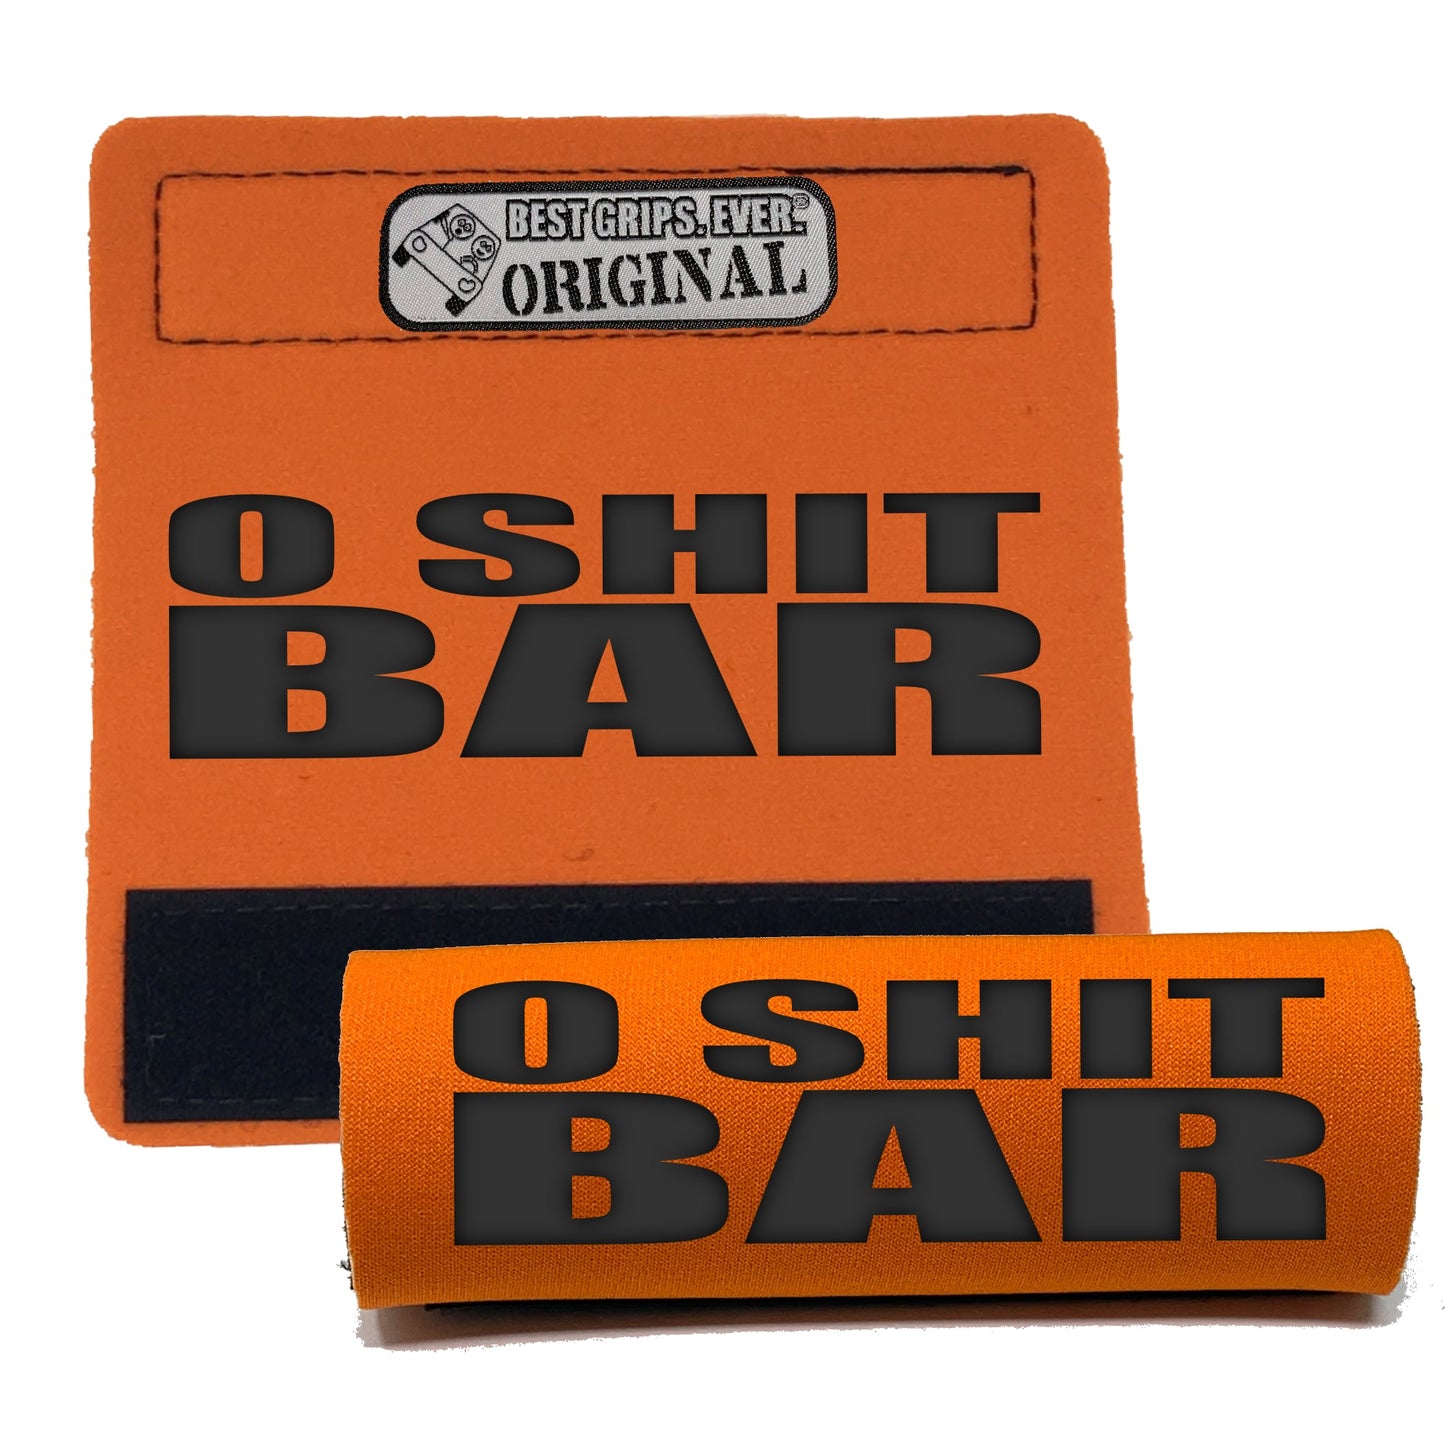 The O Shit Bar® - BEST GRIPS. EVER.®